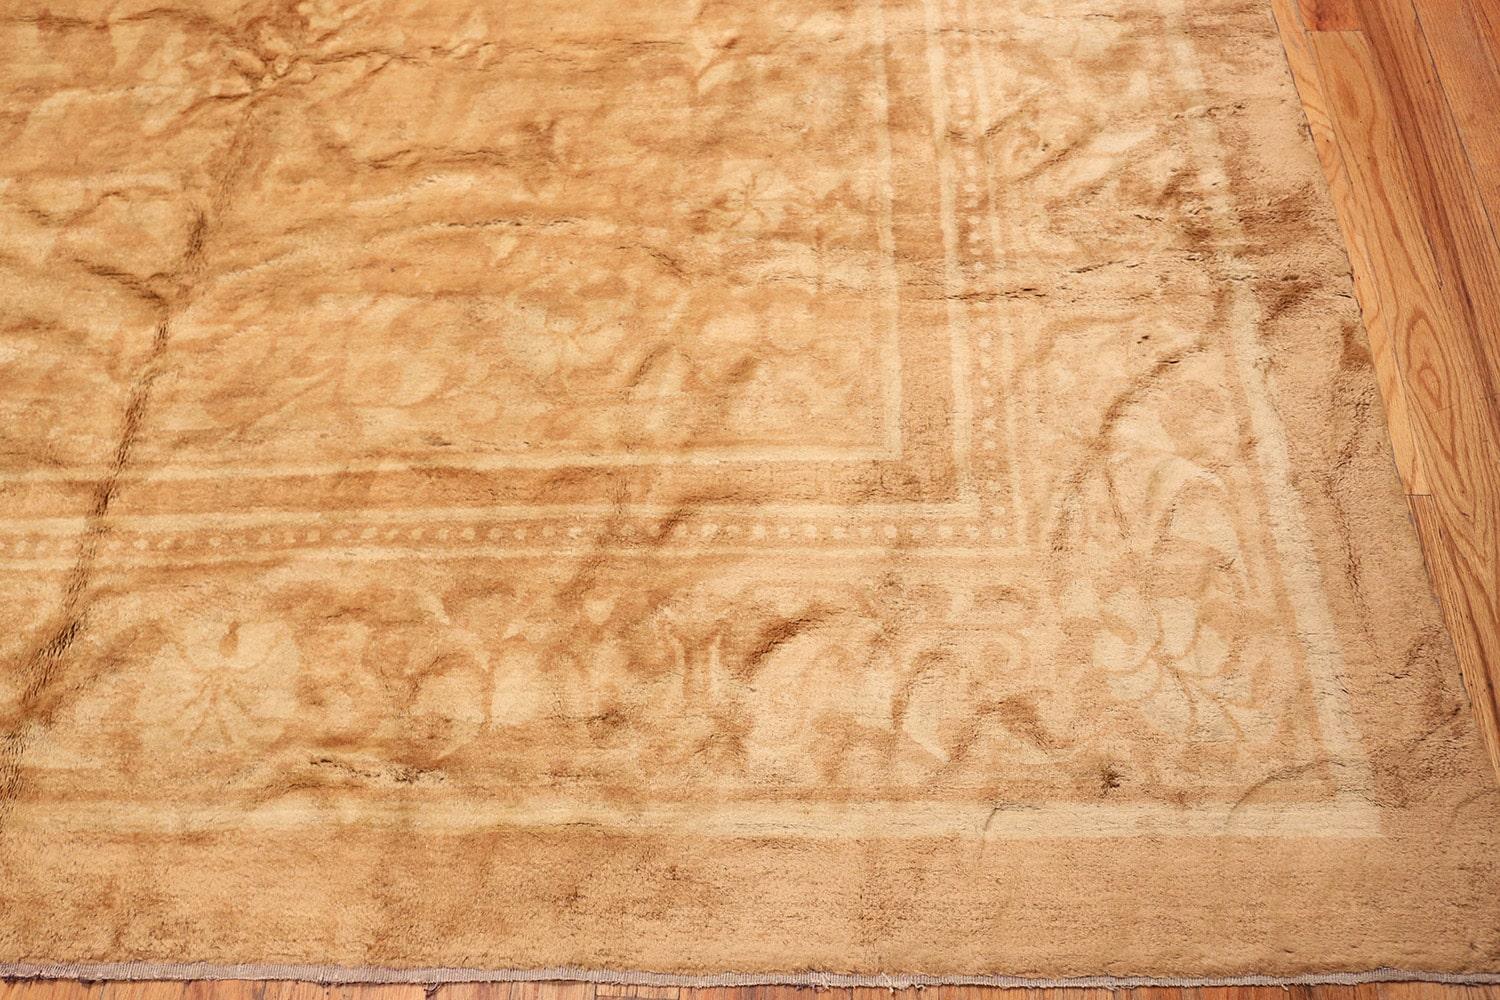 Hand-Woven Oversized Antique Oriental Indian Agra Rug 15'10